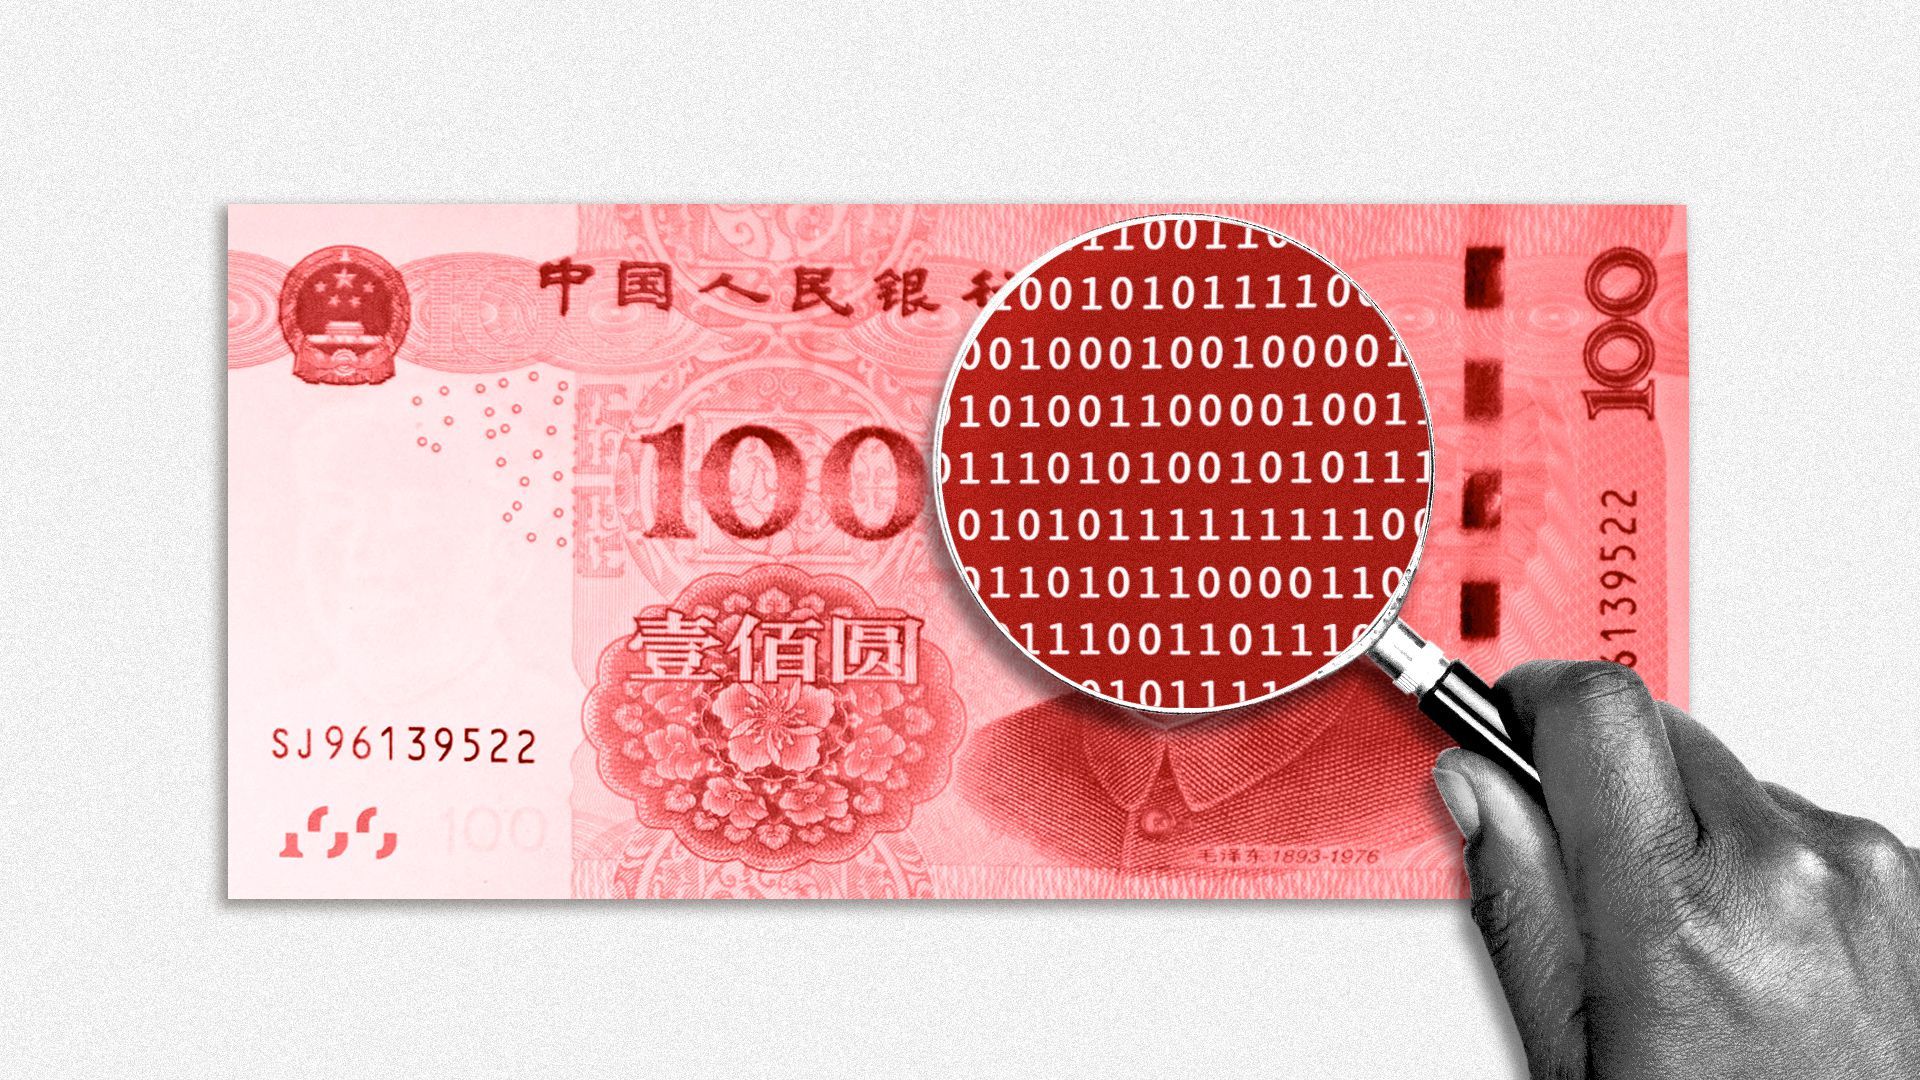 Illustration of a hundred Yuan note, with a magnifying glass revealing binary code within the note. 